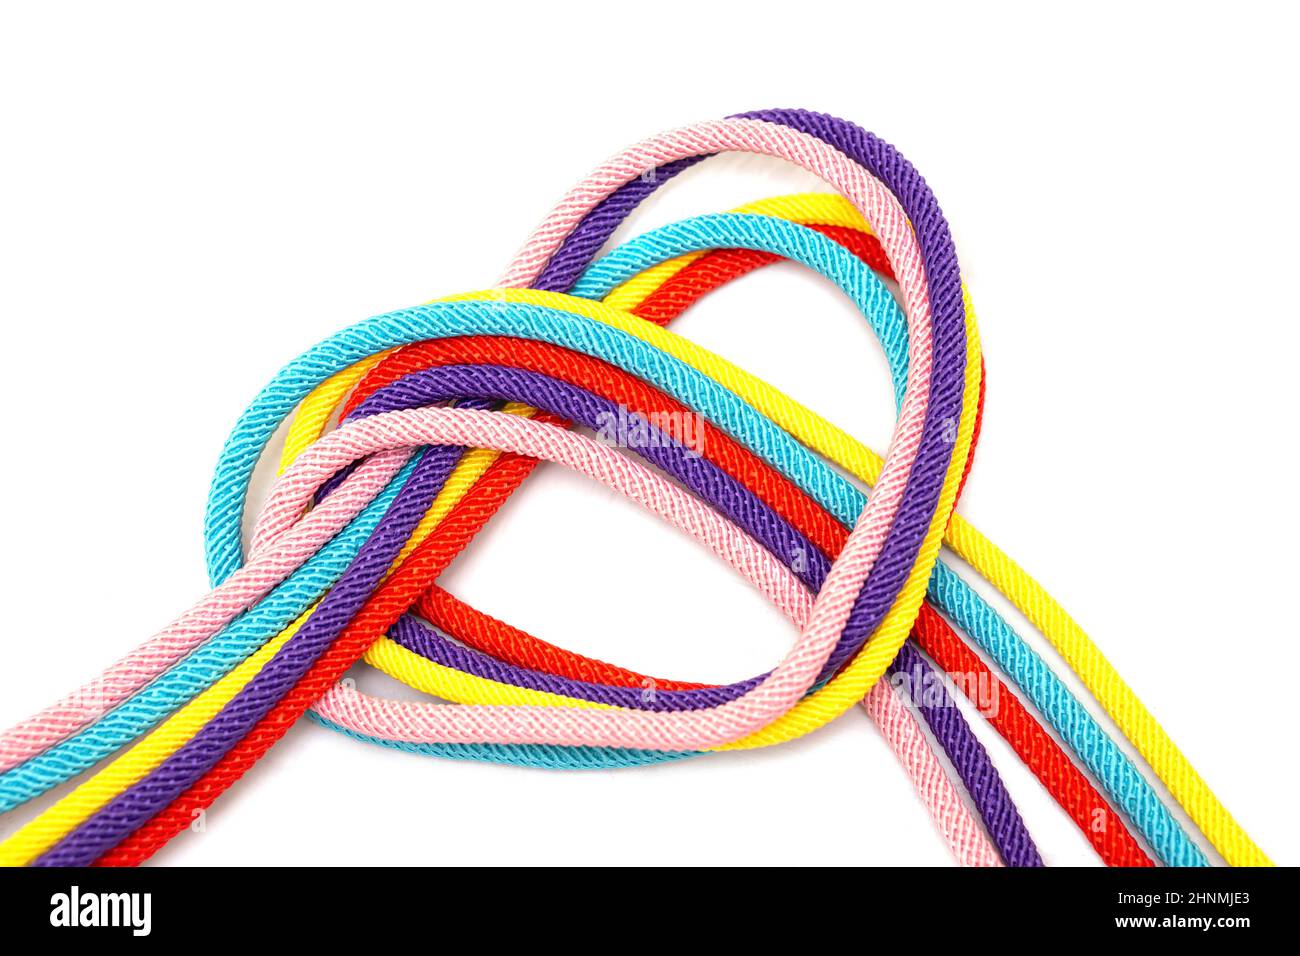 Heart shaped made of five multicolored cords tied together isolated on white background. Community integration concept. Stock Photo